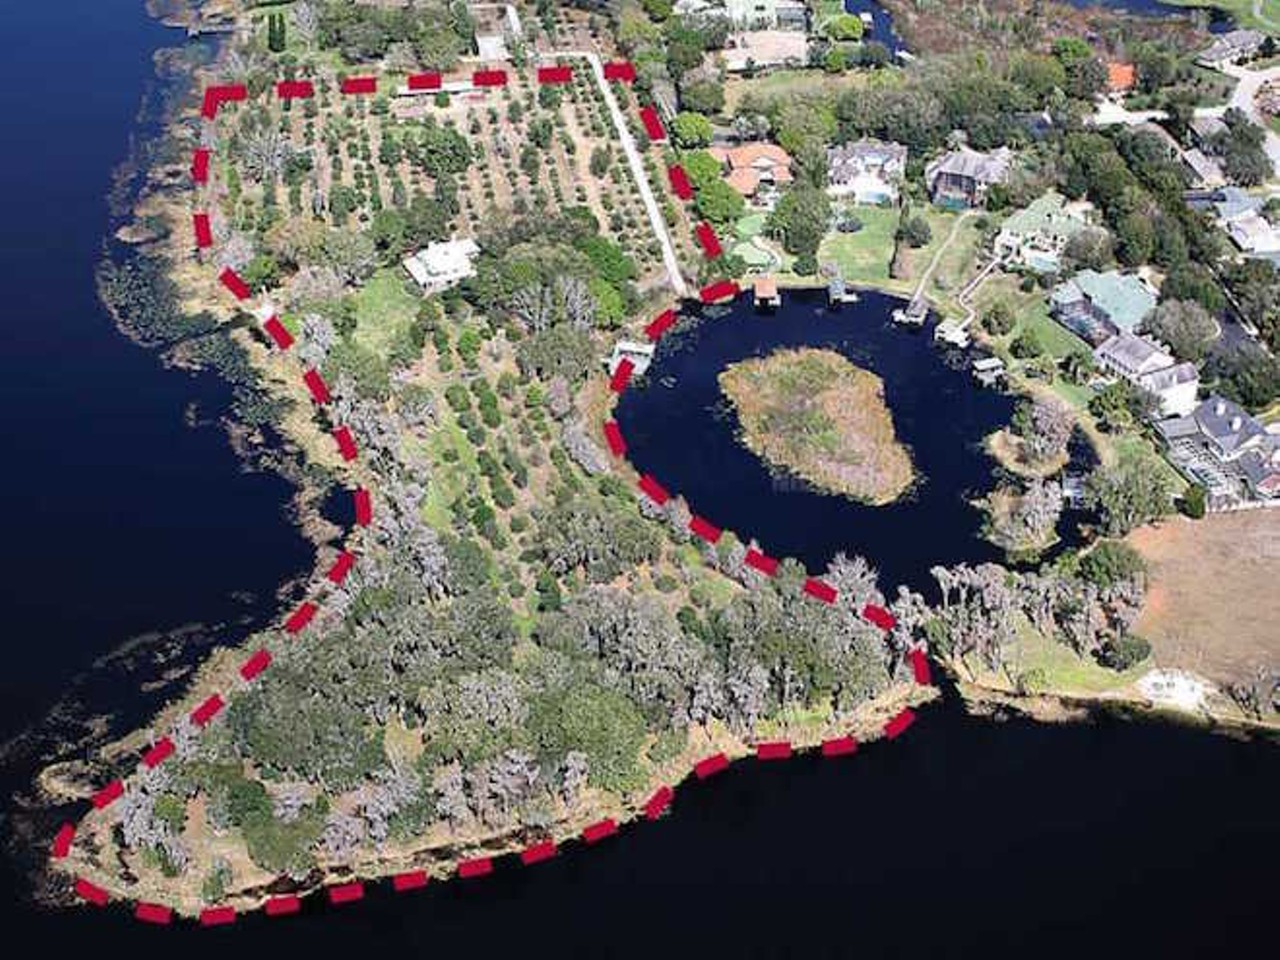 It is its own peninsula with multiple residences, sandy lakefronts and 12.5 acres to roam (or develop). And you can own it all for $12,500,000.